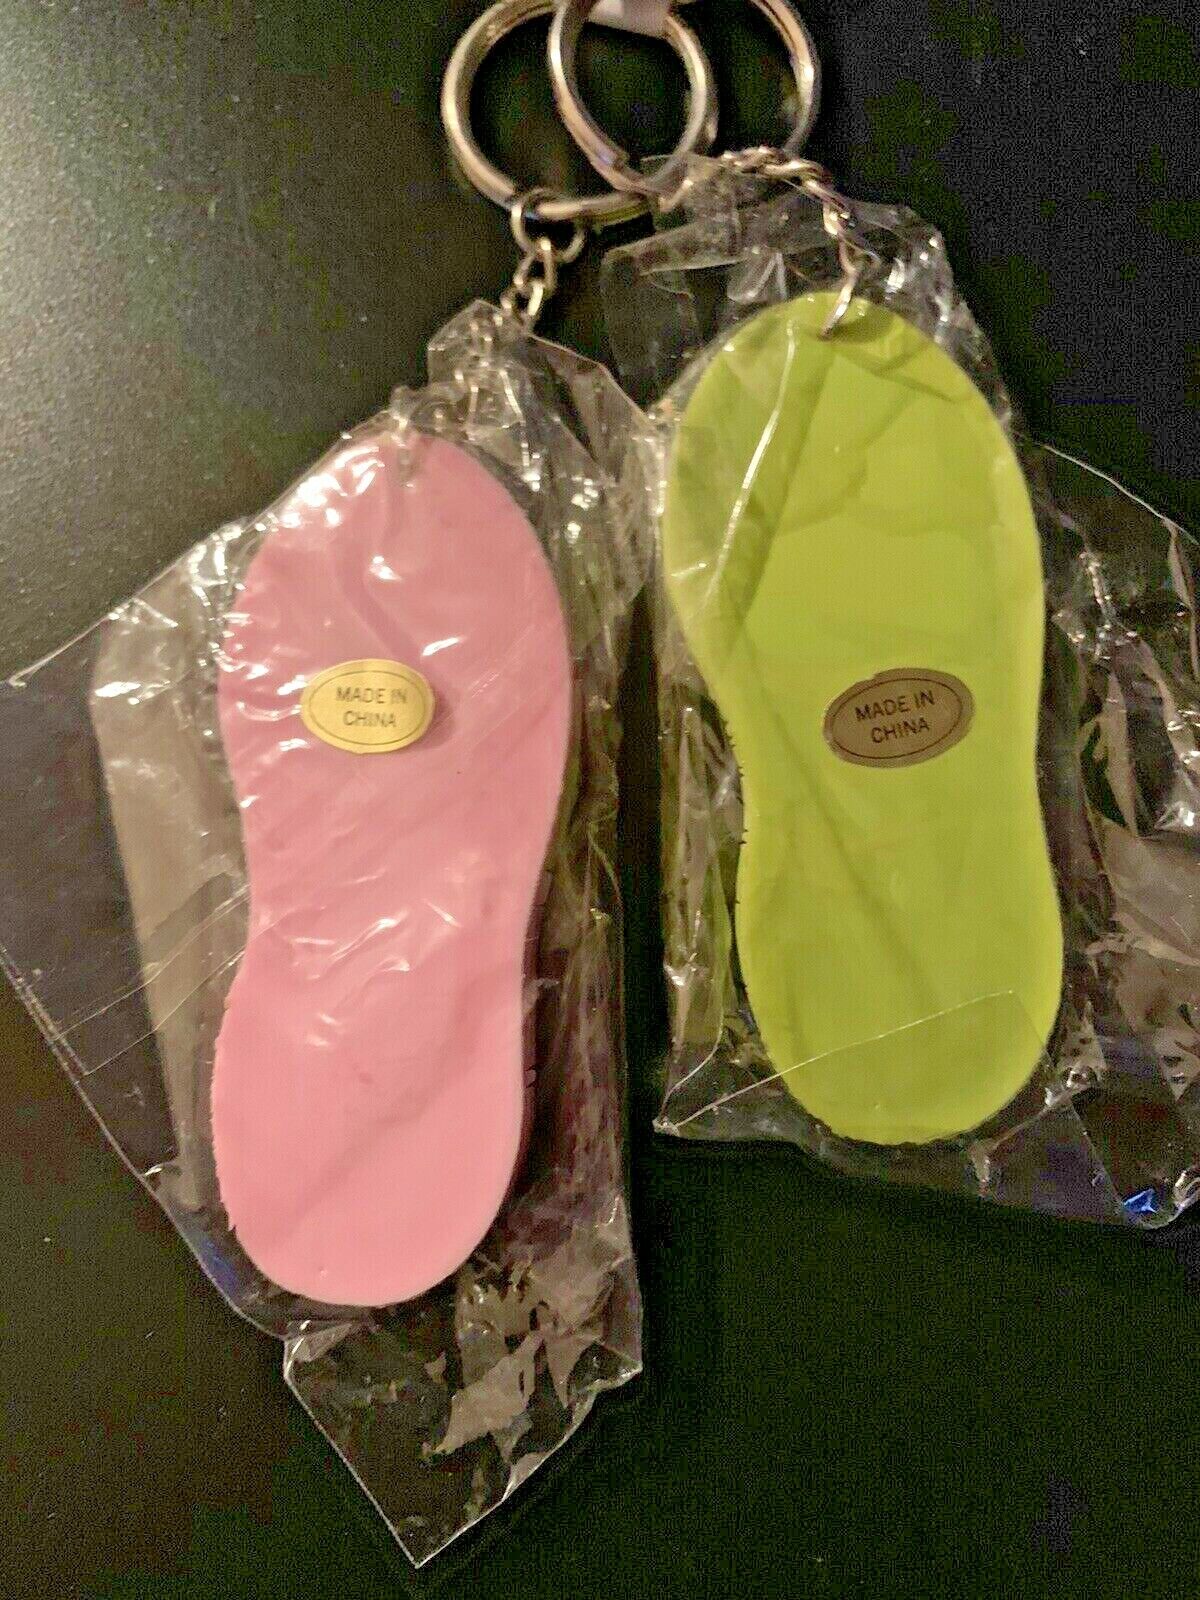 NOS Two Thongs/ Sandal Keychains